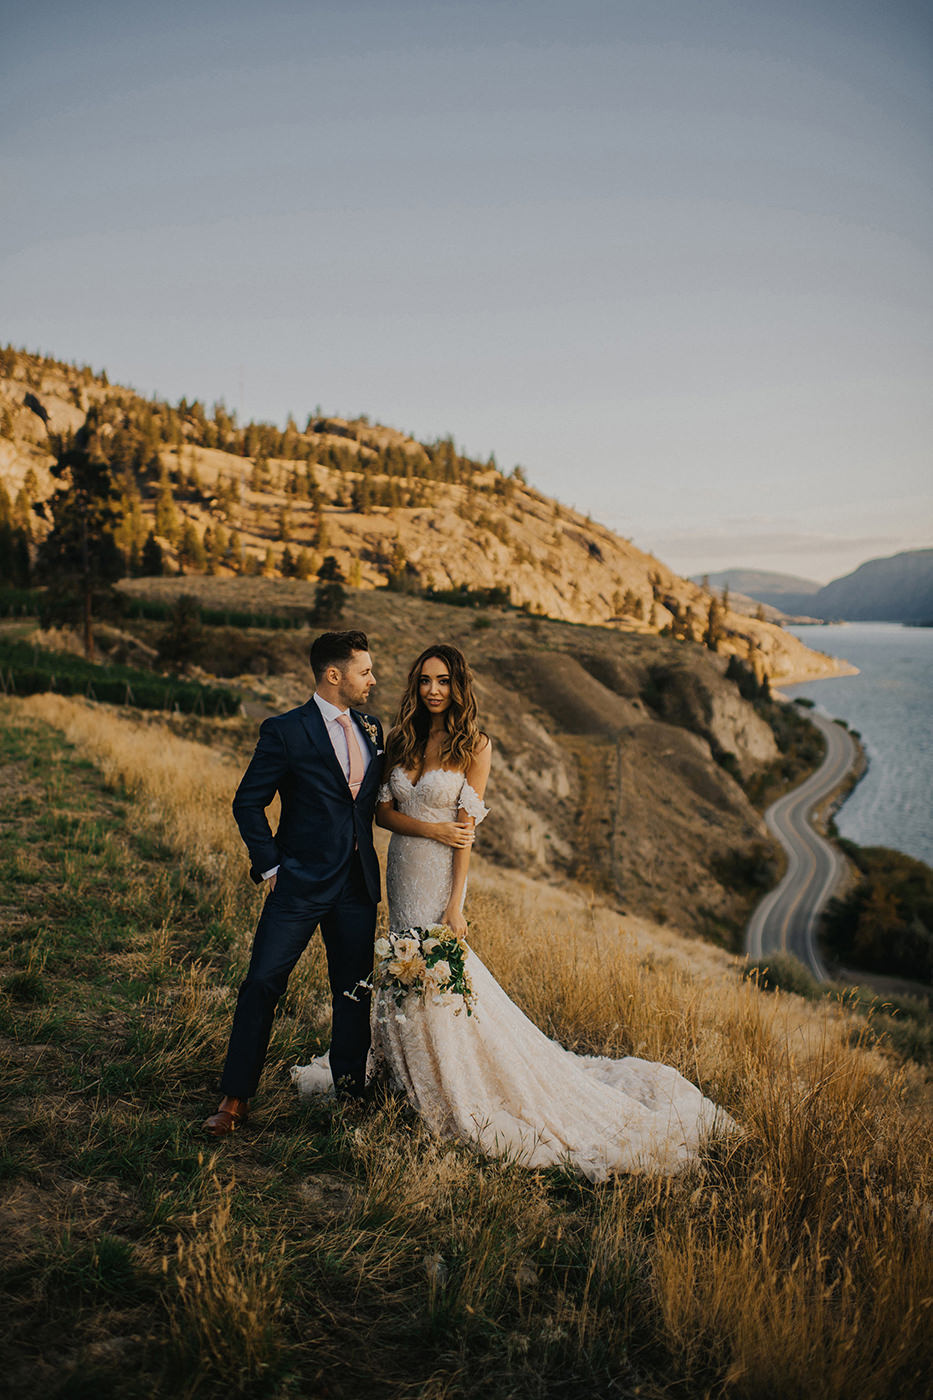 Painted Rock Winery wedding couple in the Penticton